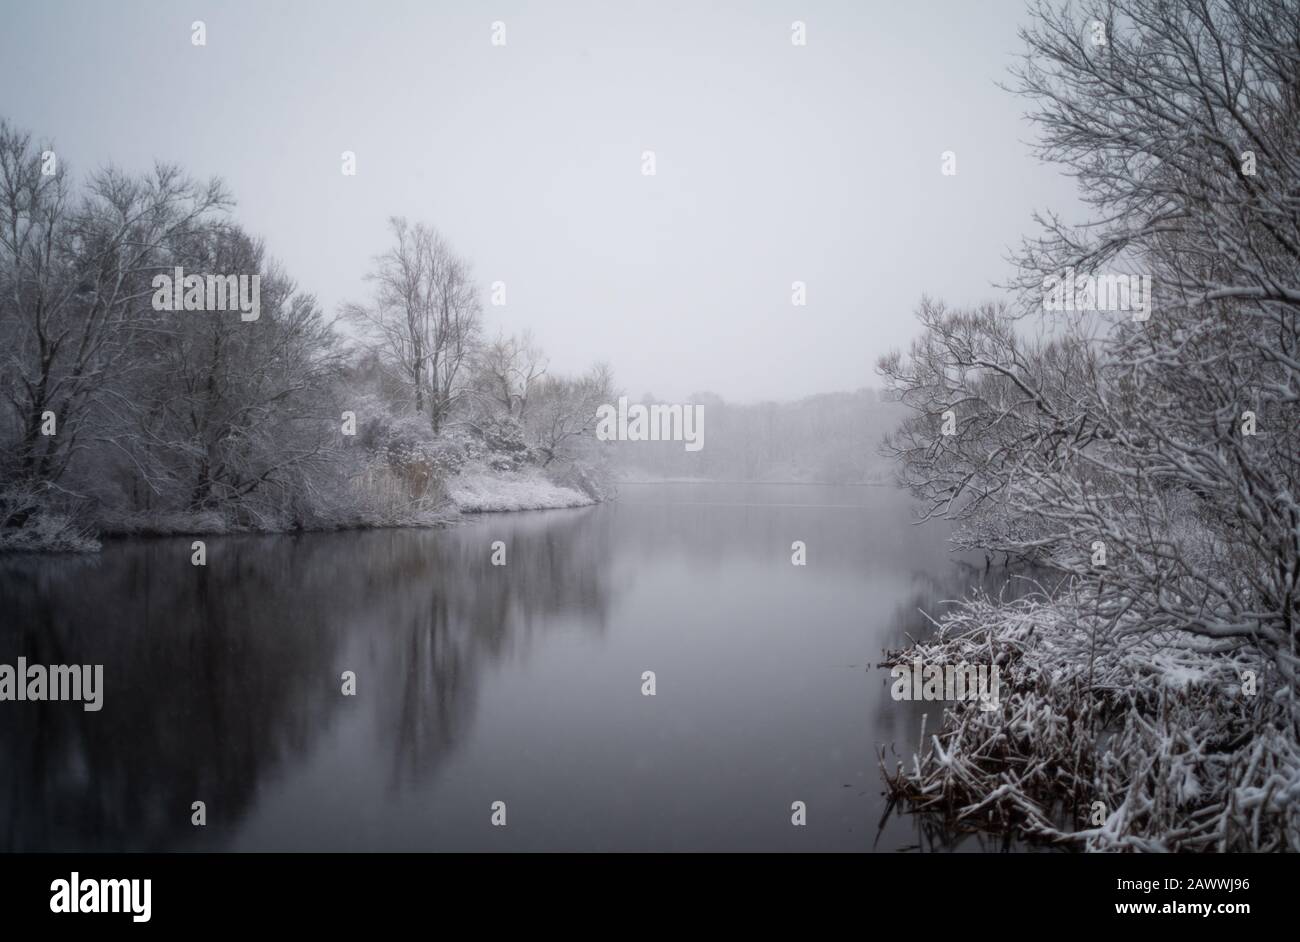 A Snowy Scene Of A Pond Surrounded By Trees Stock Photo